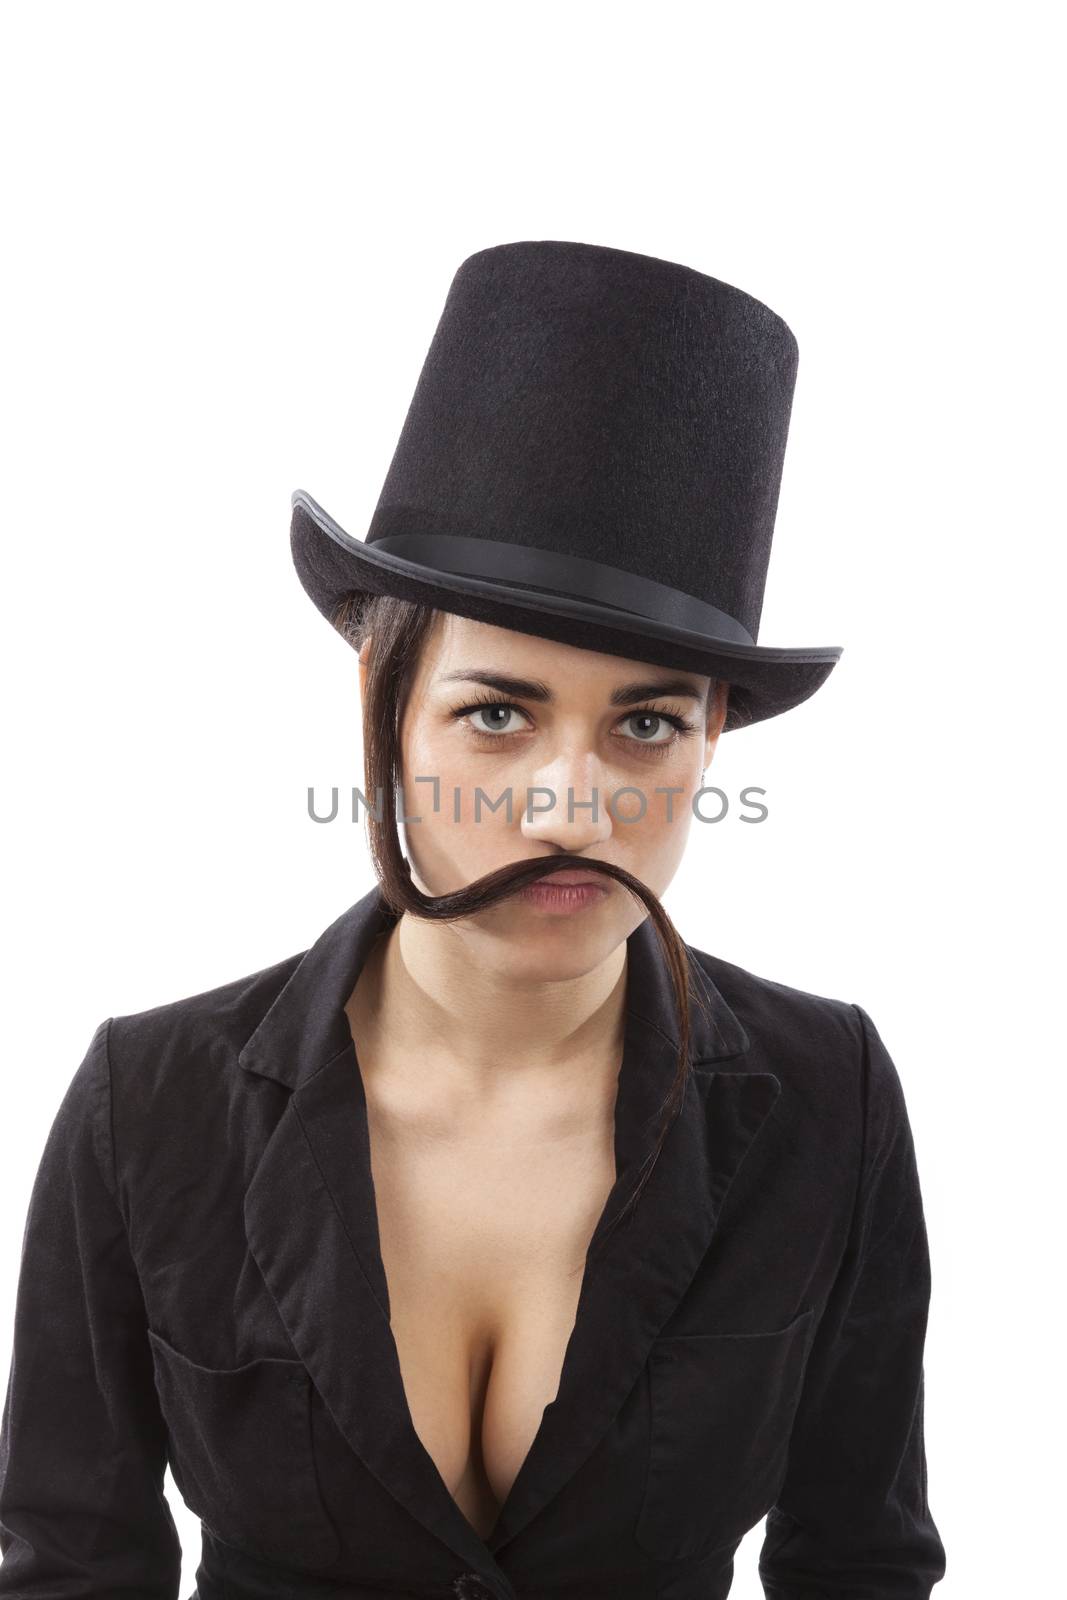 Beautiful young girl with black hat and black dress with mustache from hair. Female discrimination in workplace and feminism.